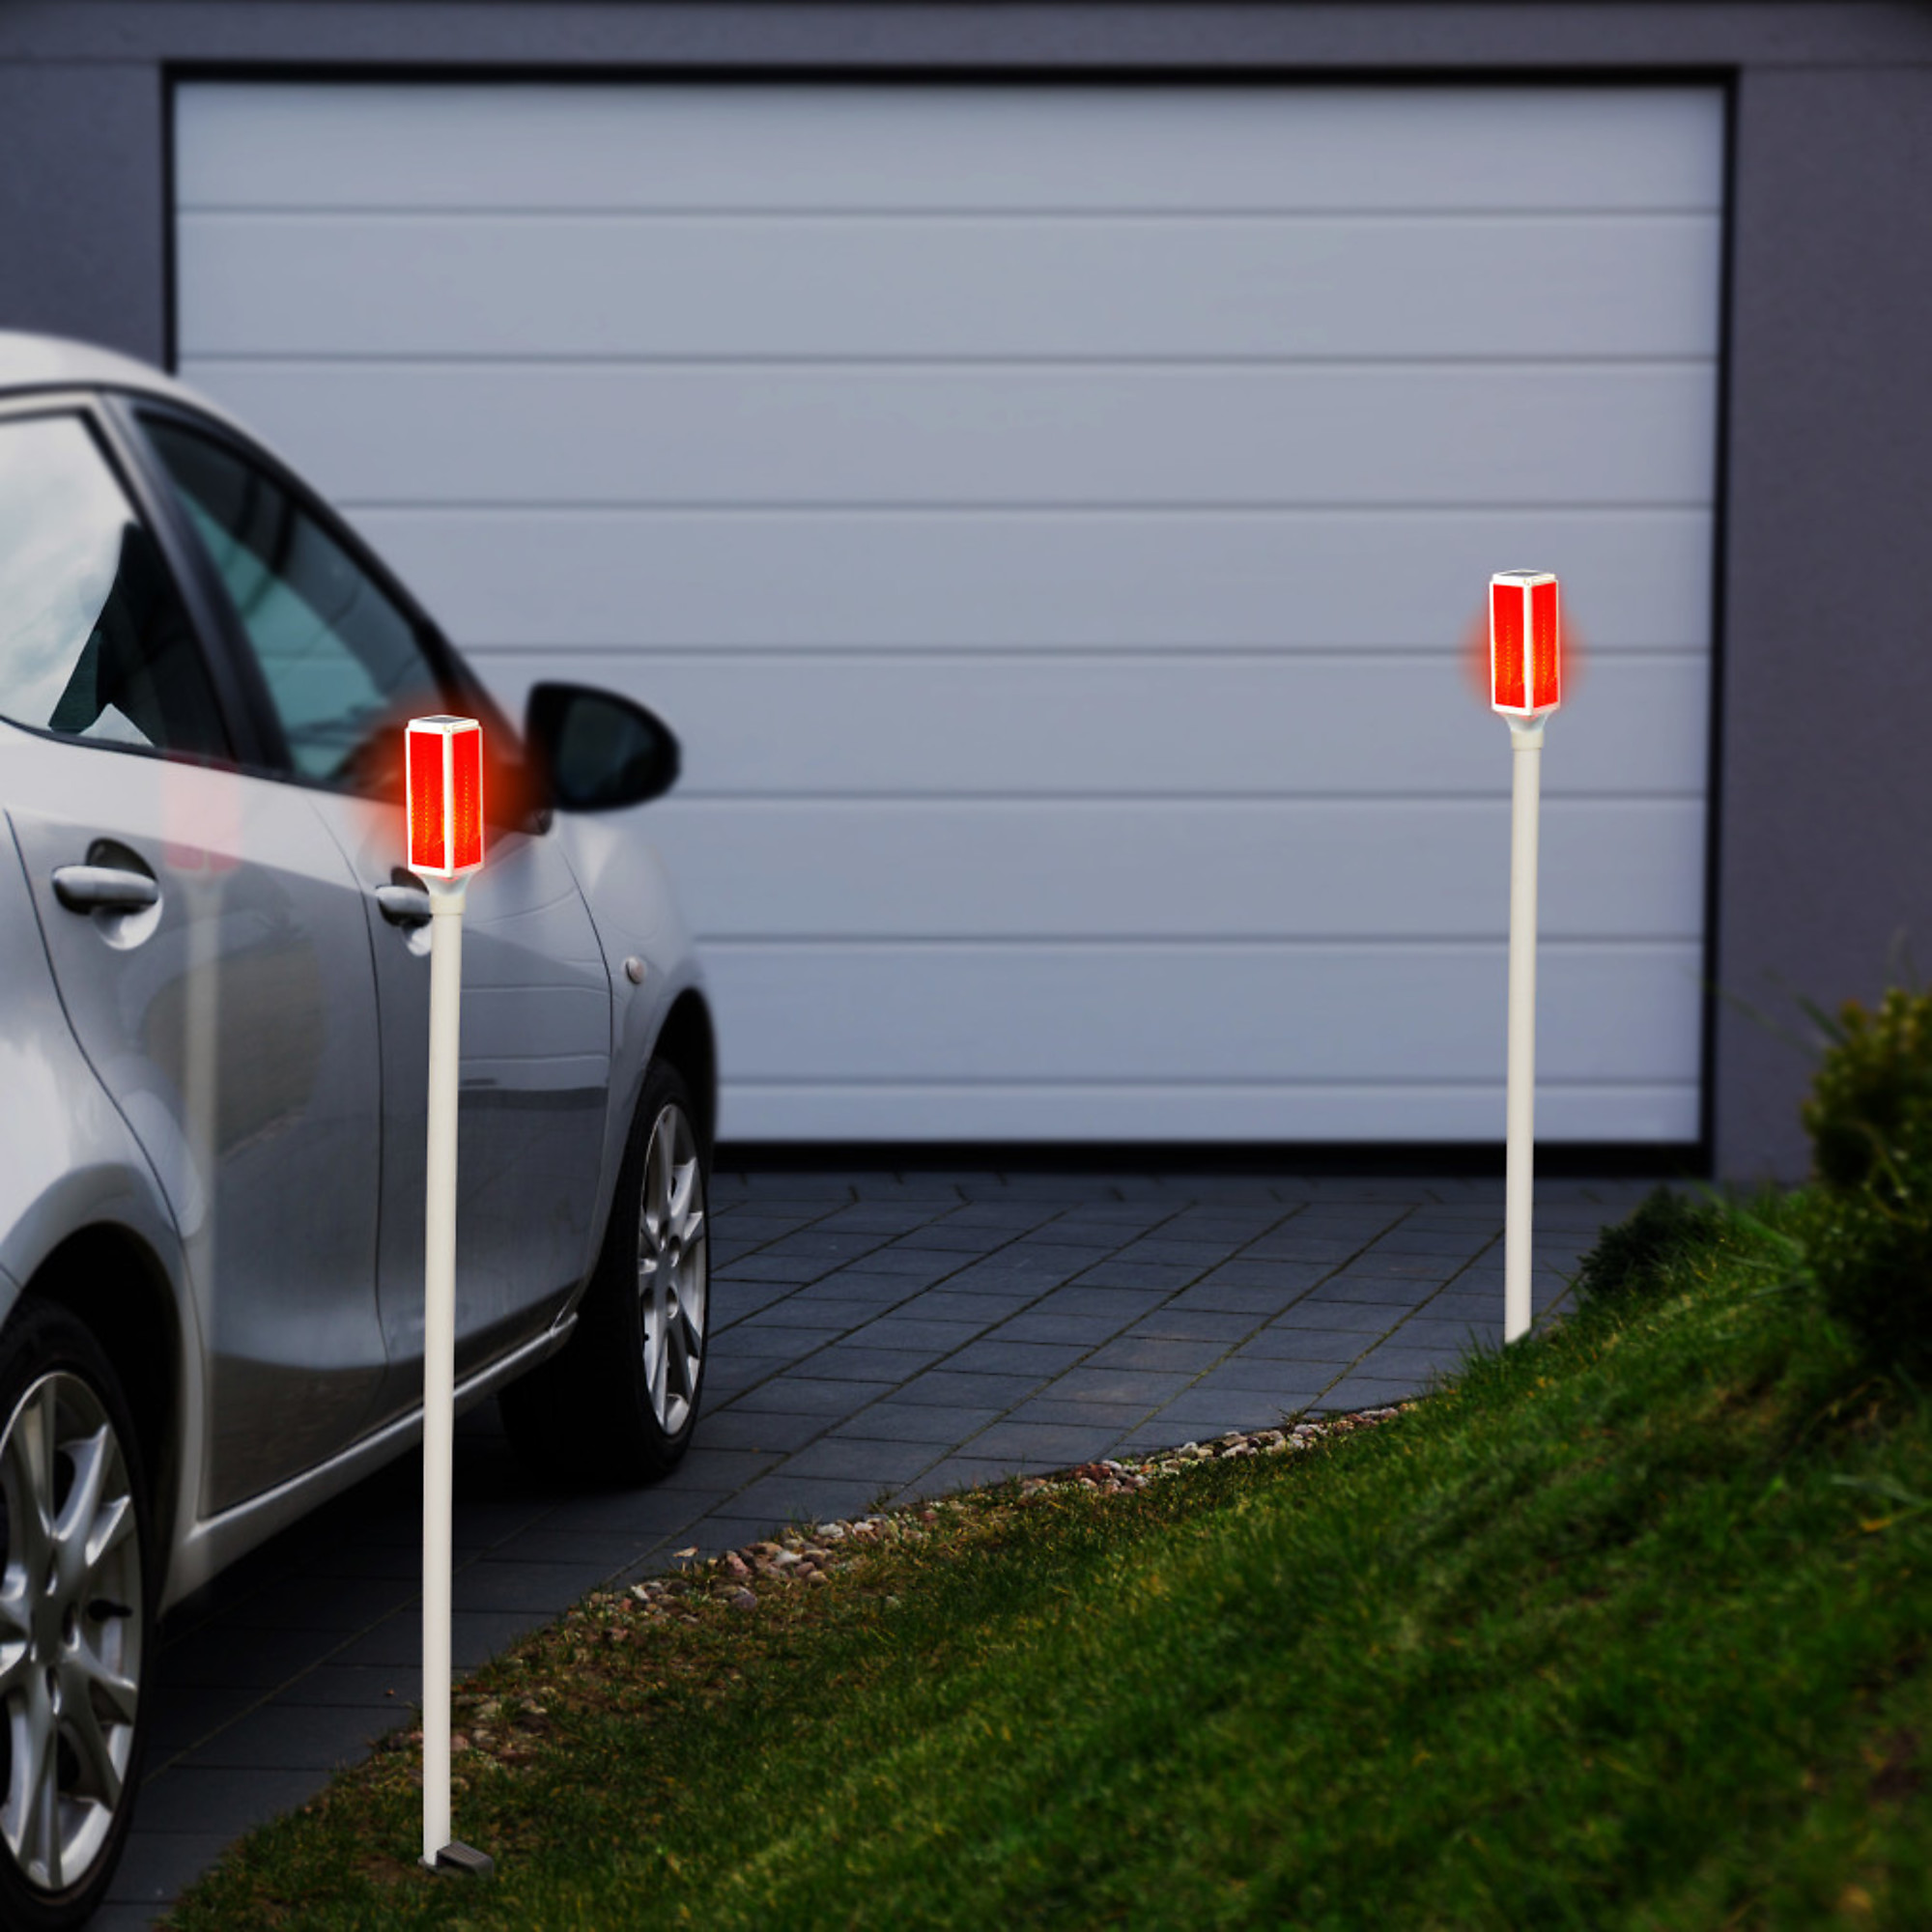 Alpine Corporation, Solar Driveway Marker with Red LED Lights -2 Pc, Included (qty.) 2, Reflector Length 2 in, Shaft Color White, Model SLC104SLR-RD-2